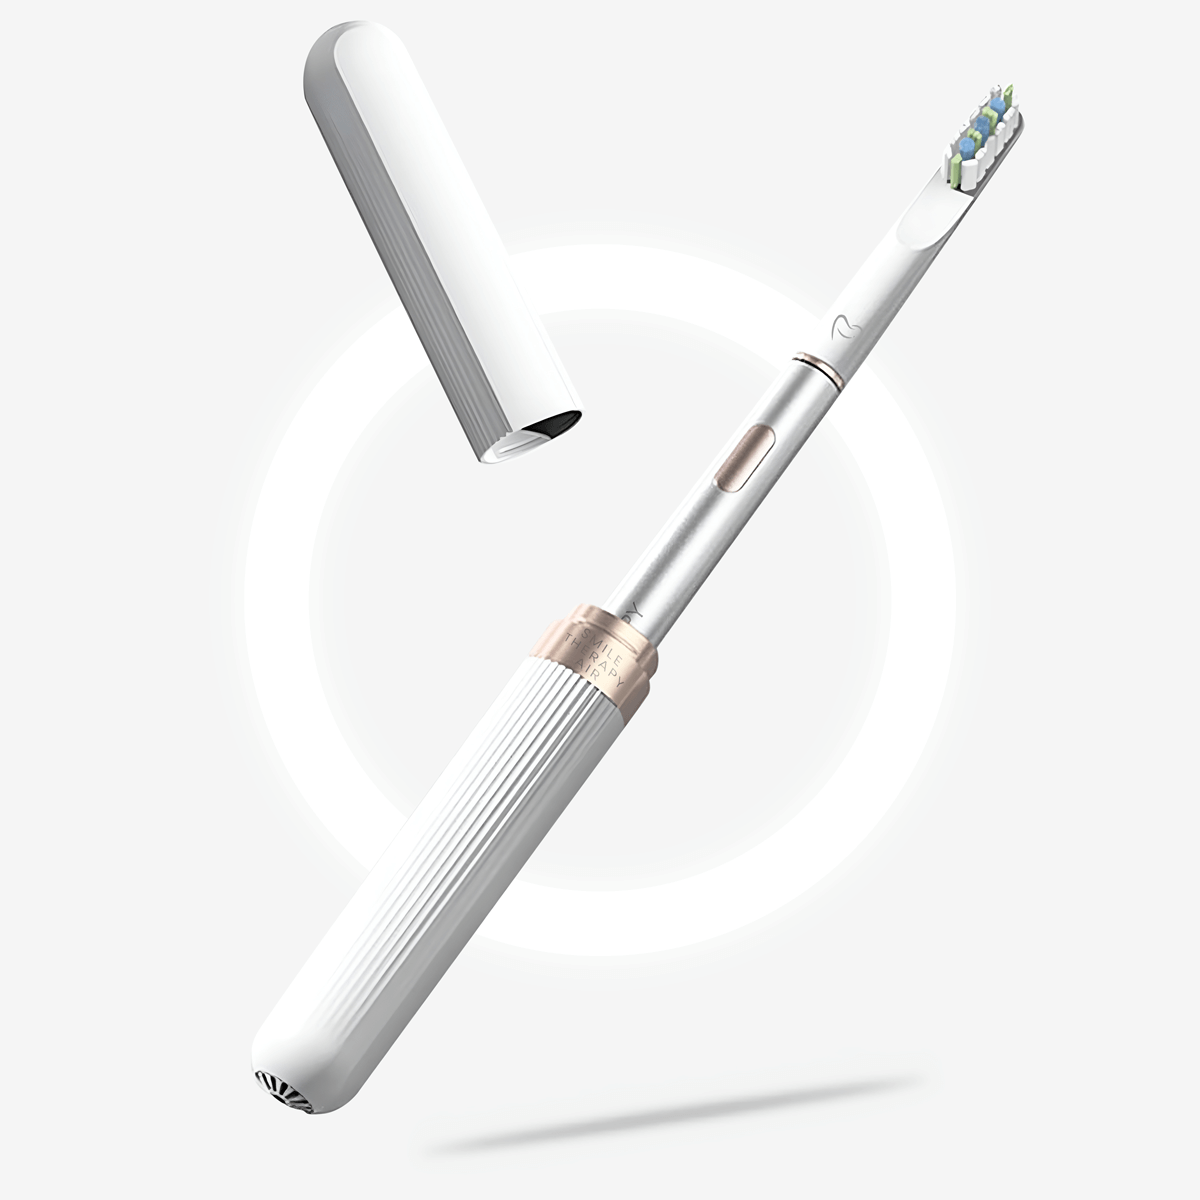 Air Advanced Electric Toothbrush 3-in-1 DP11